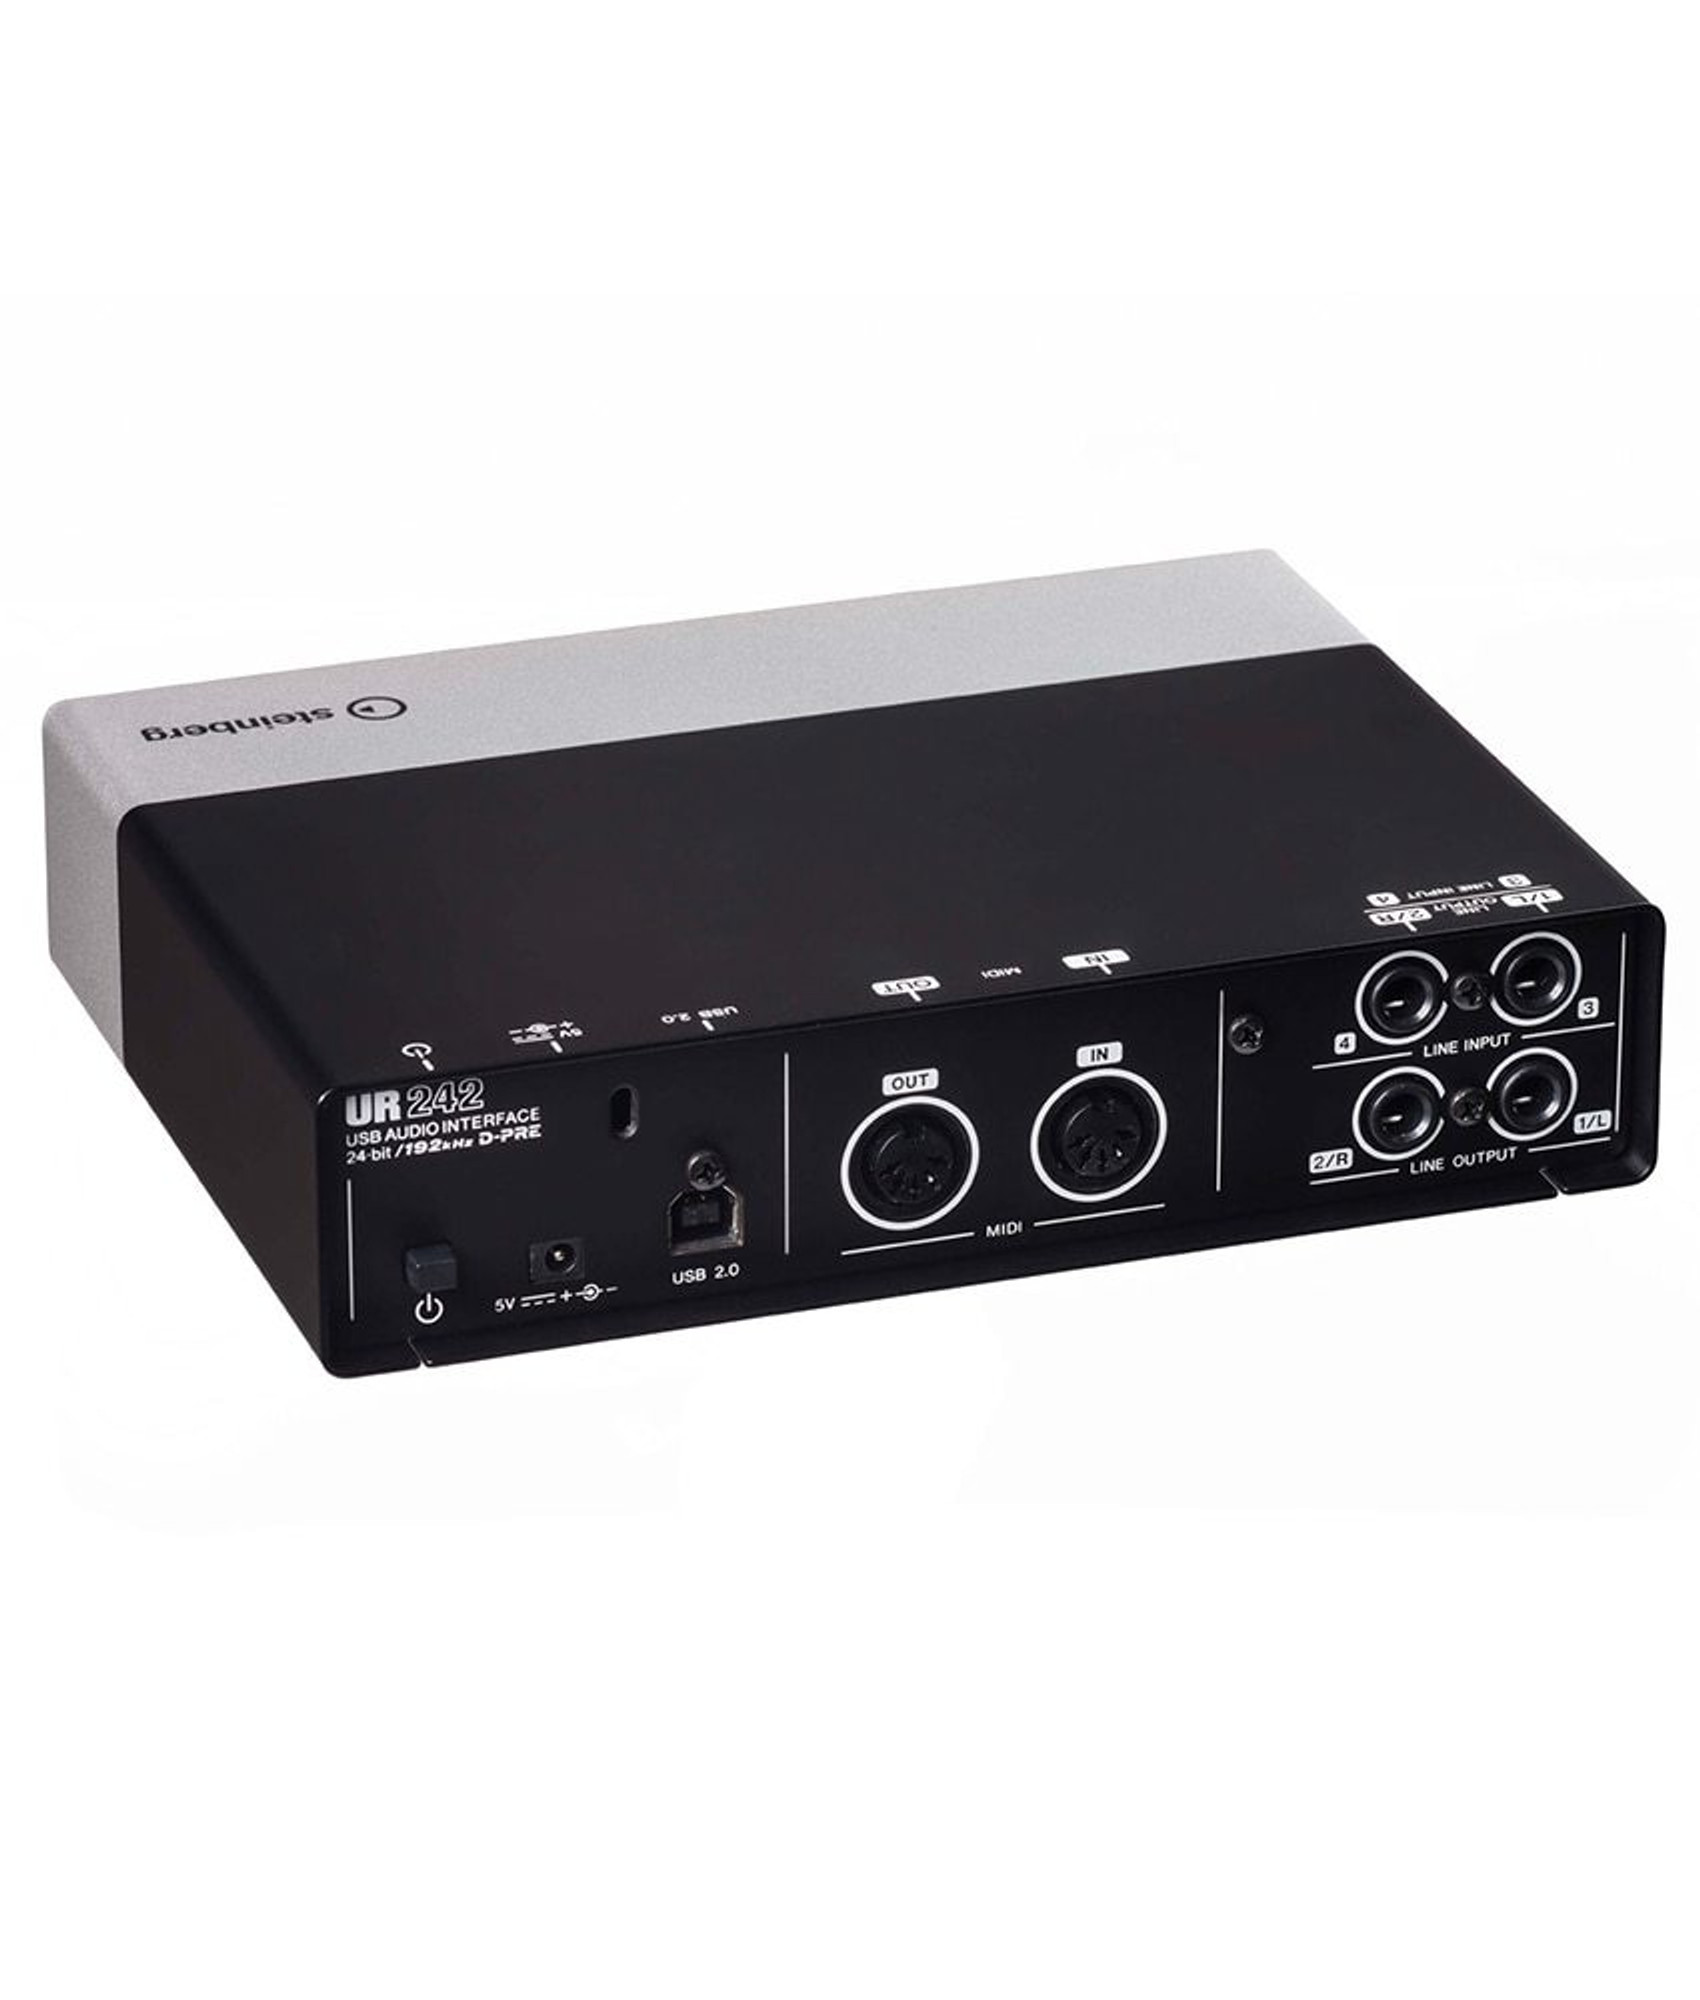 Steinberg UR242 USB 2.0 Audio I/O (4 in / 2 out) with MIDI